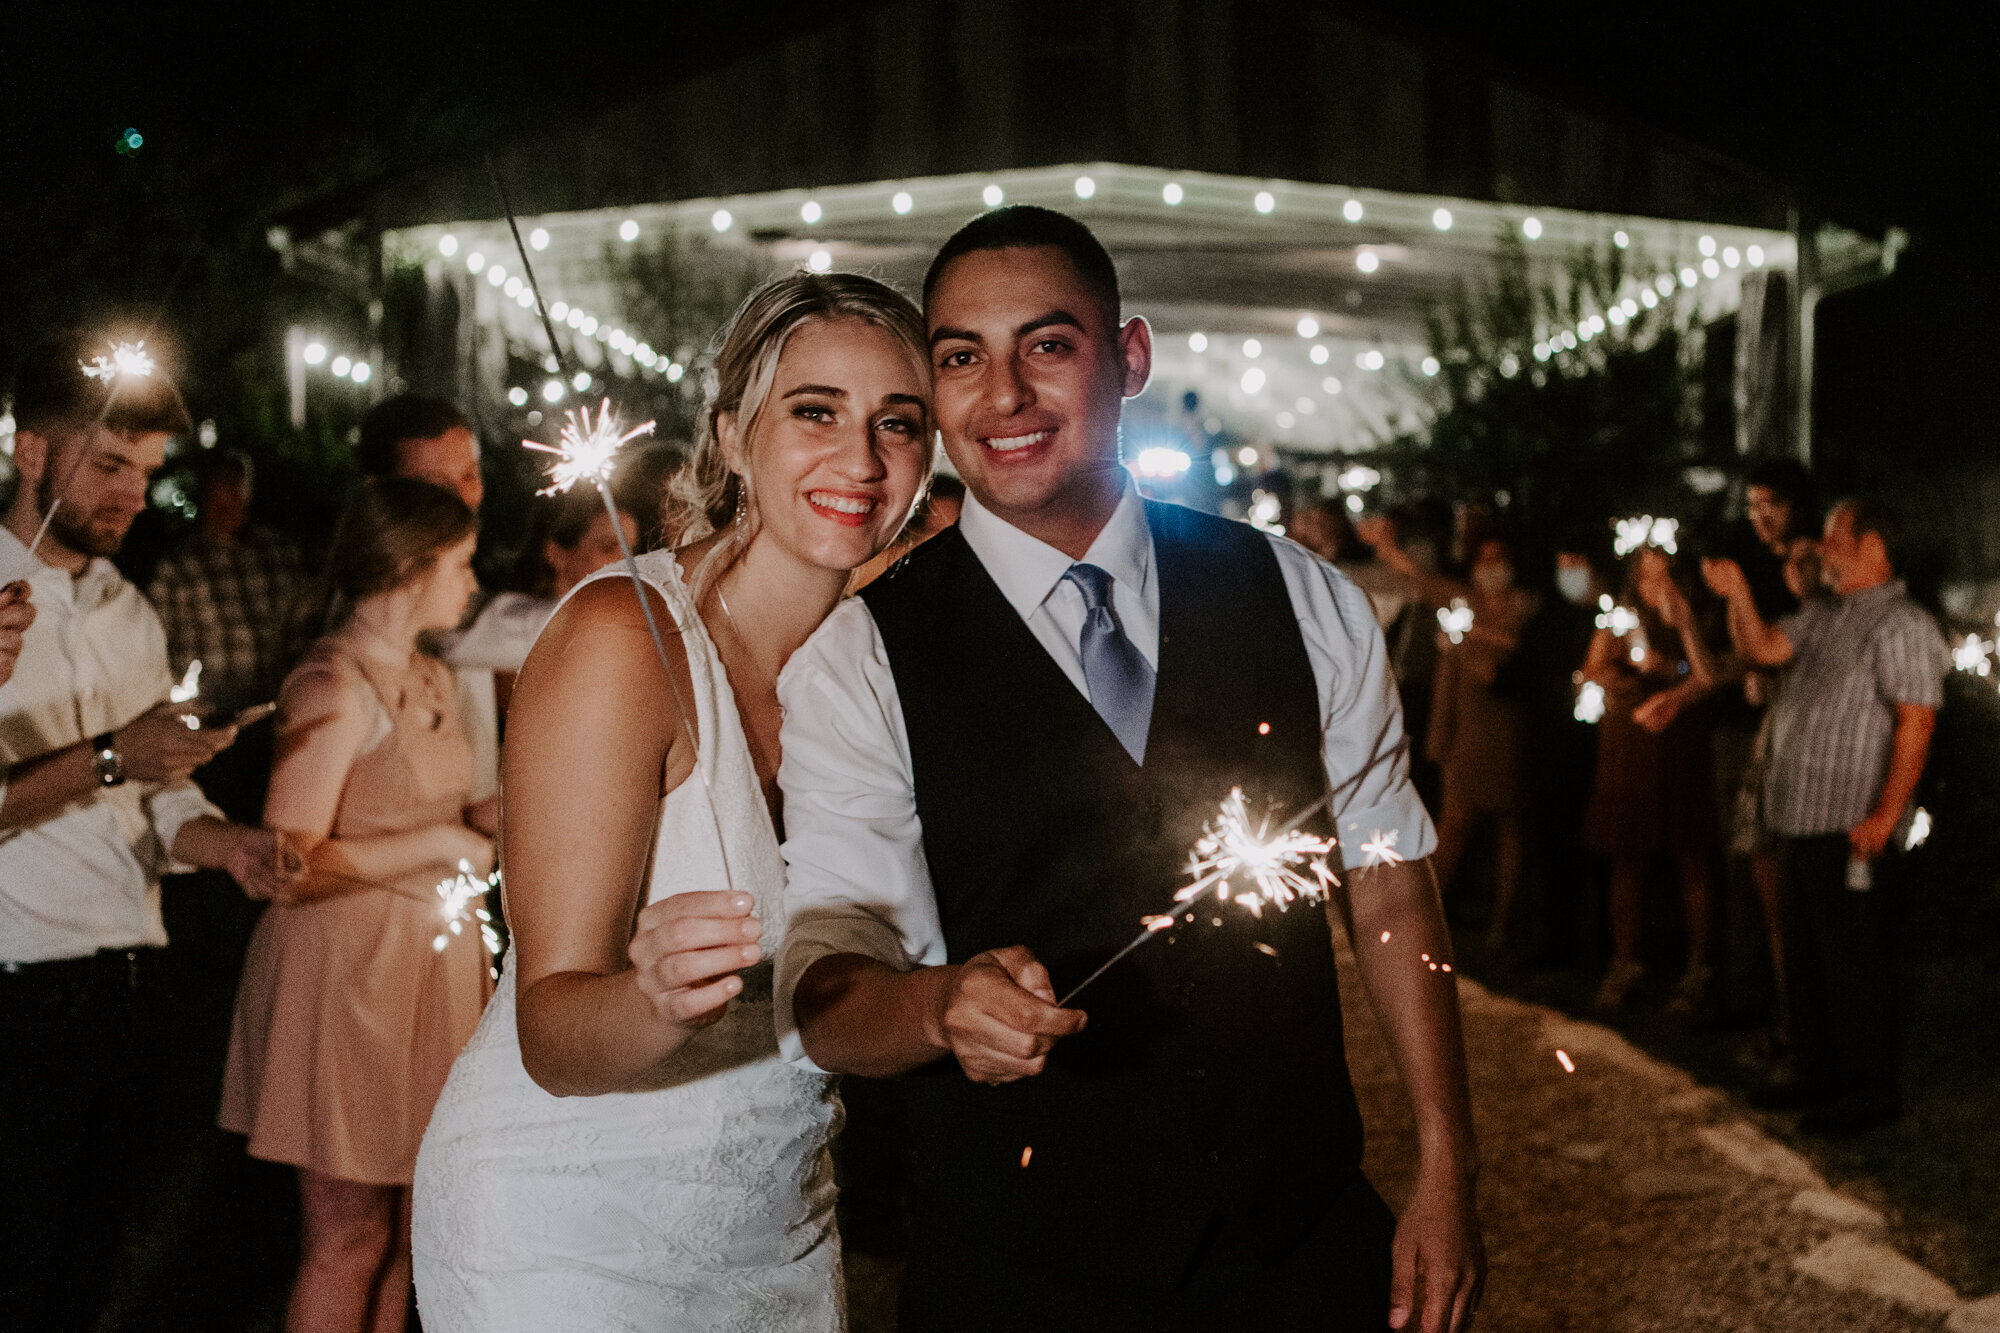 Bride and groom grand exit send off with sparklers. Radiant Bohemian Hill Country Wedding at Gruene Estate in New Braunfels, TX